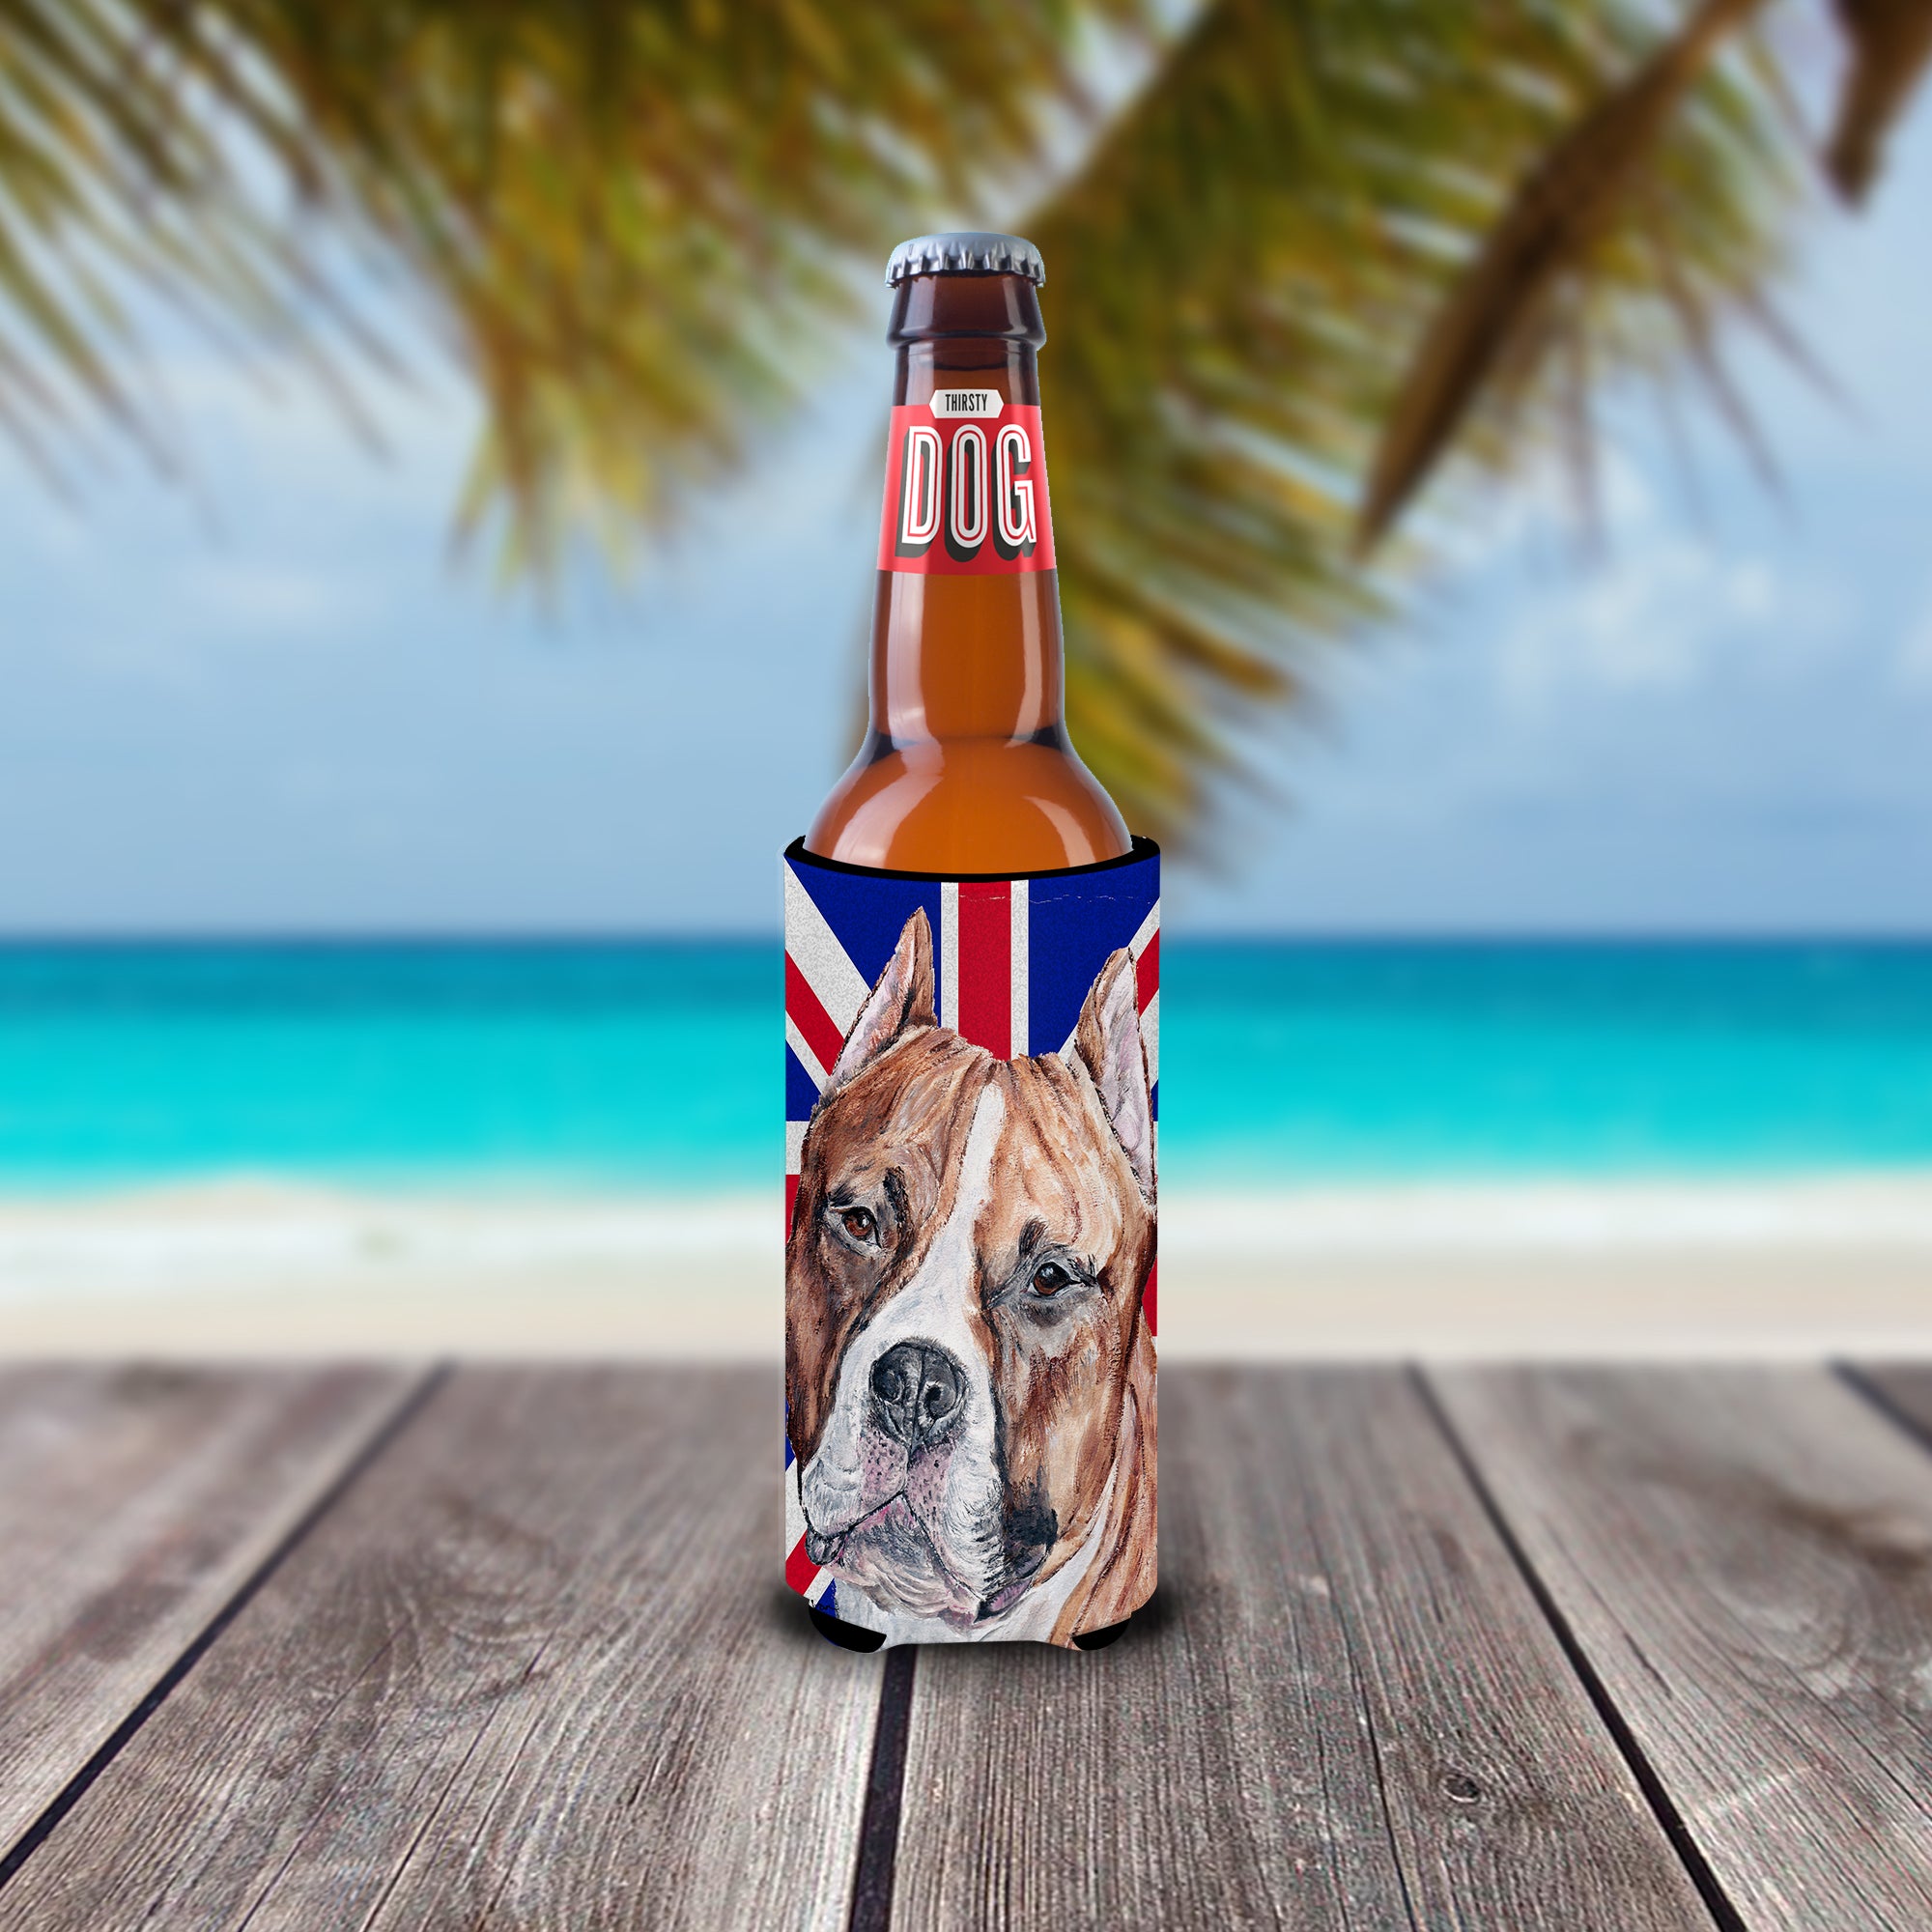 Staffordshire Bull Terrier Staffie with English Union Jack British Flag Ultra Beverage Insulators for slim cans SC9883MUK